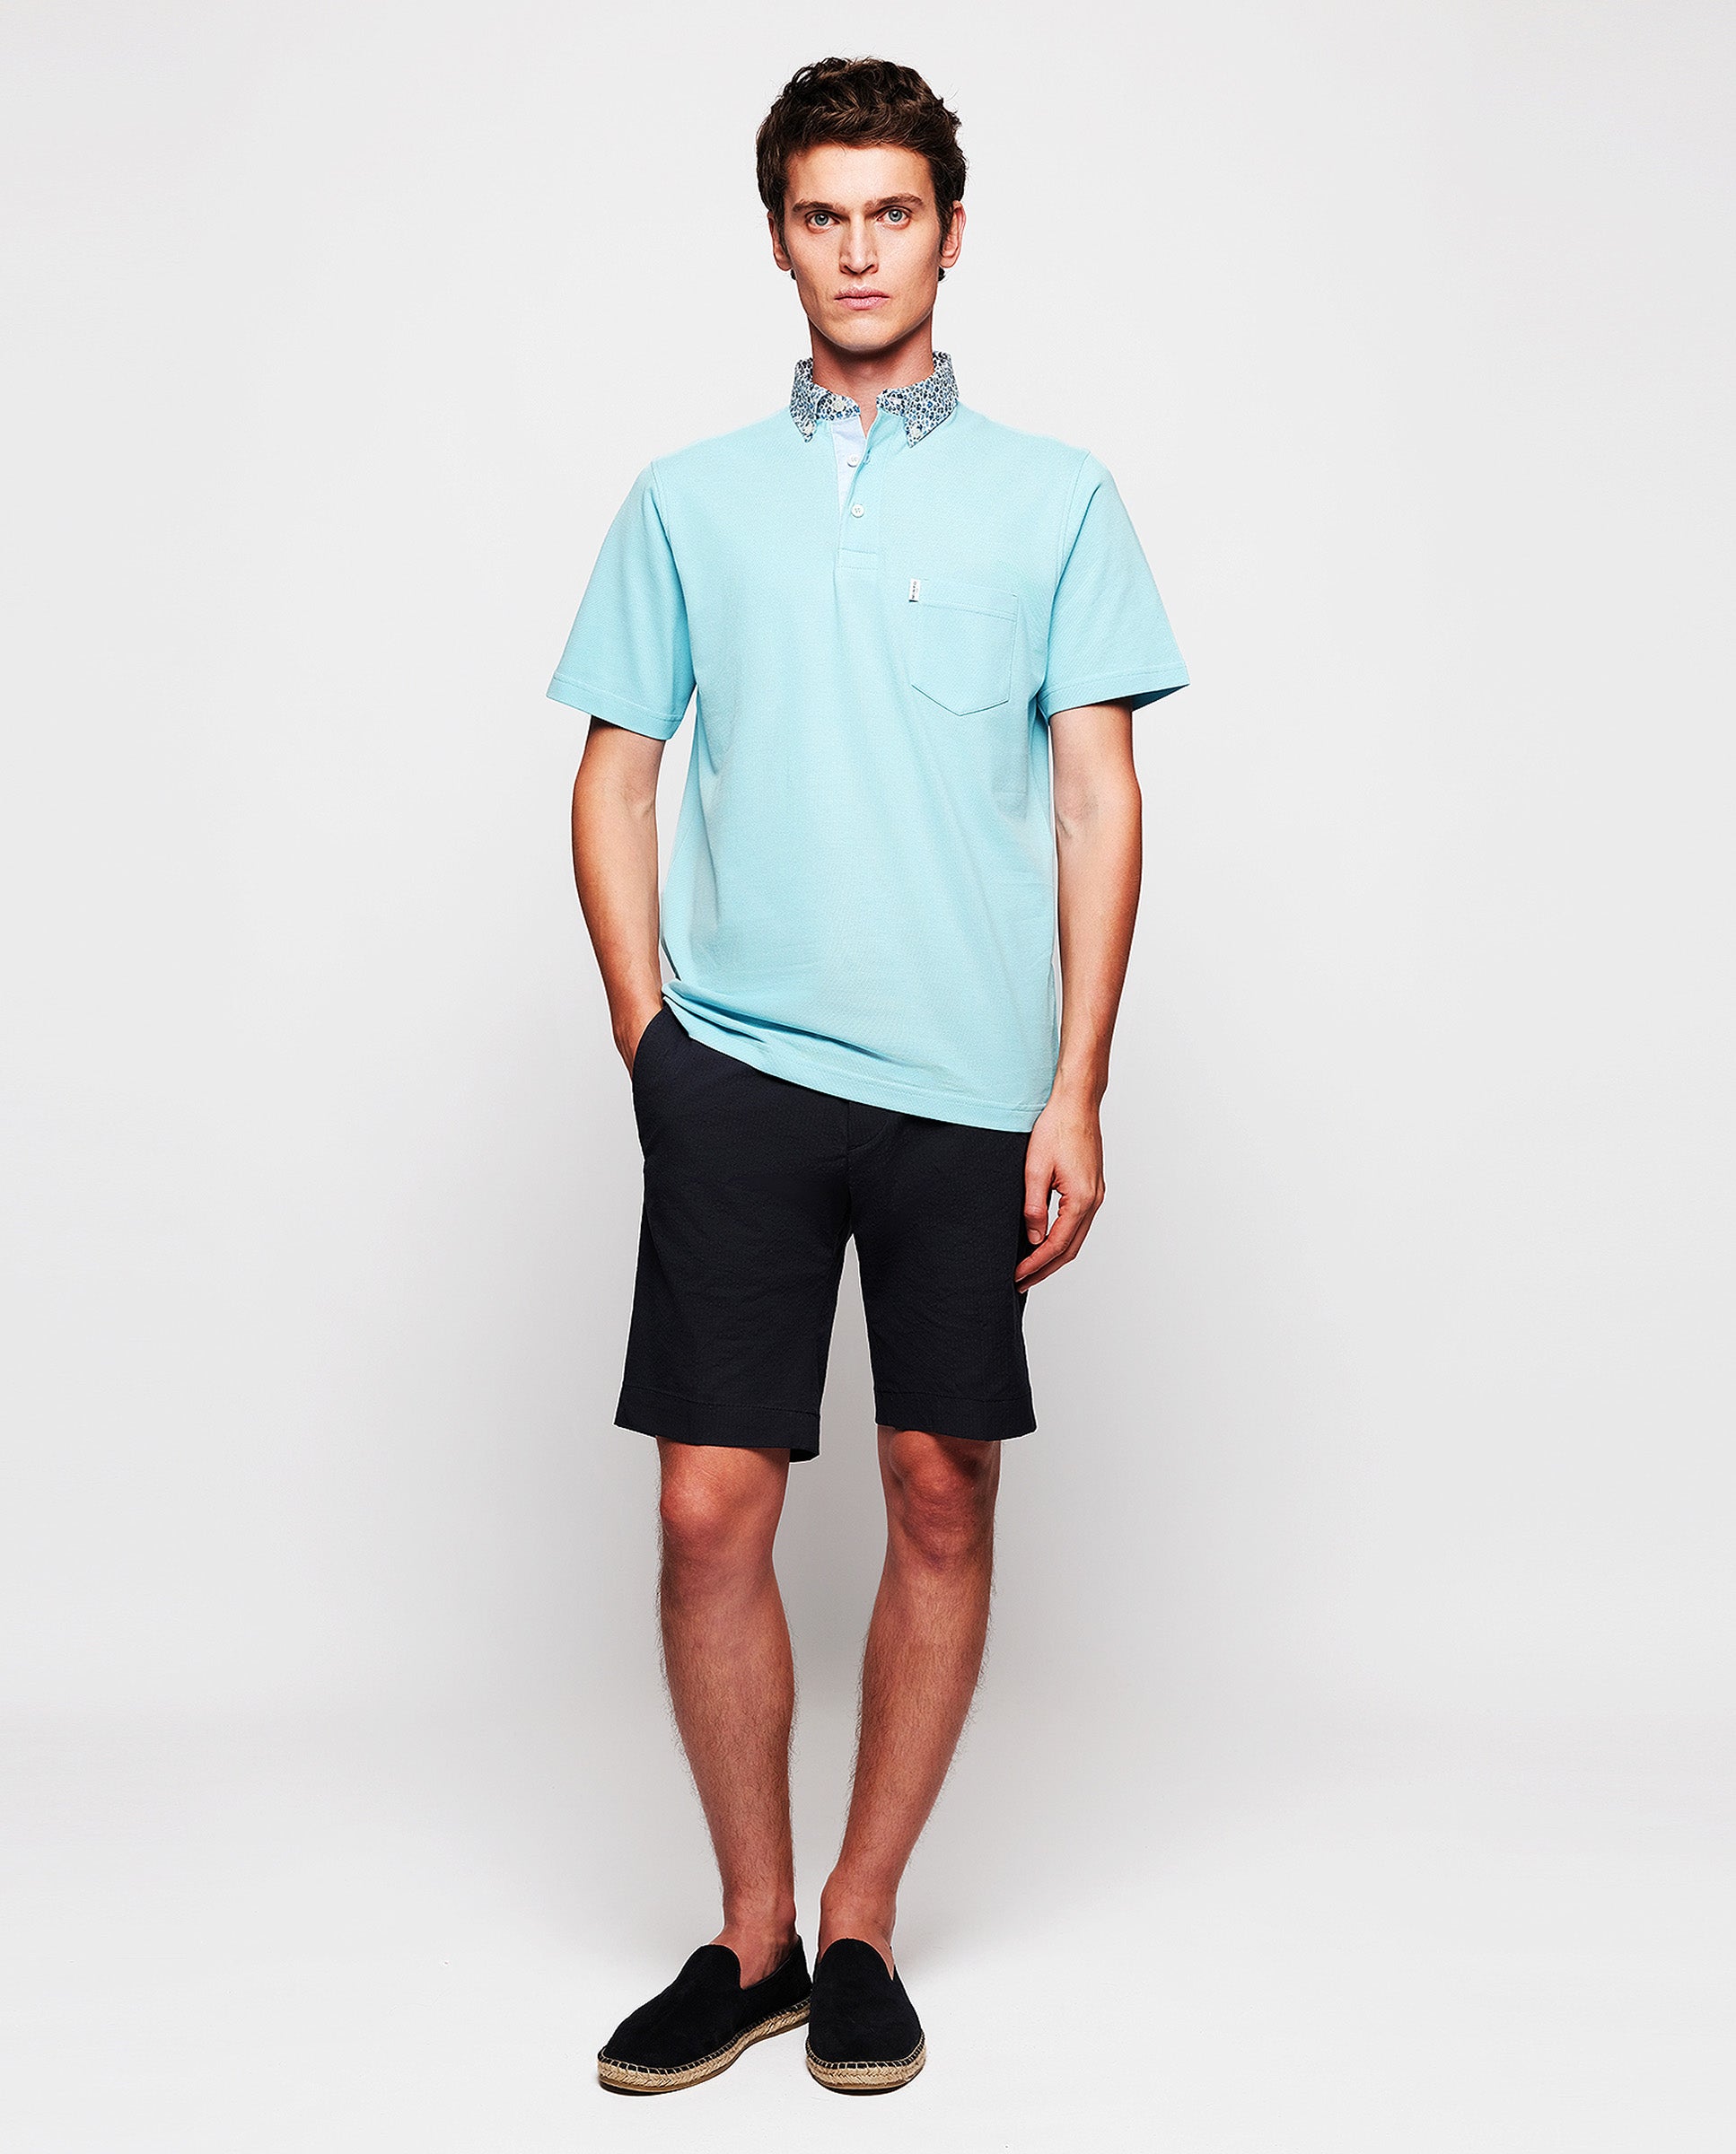 Light blue polo with breast pocket by MIRTO